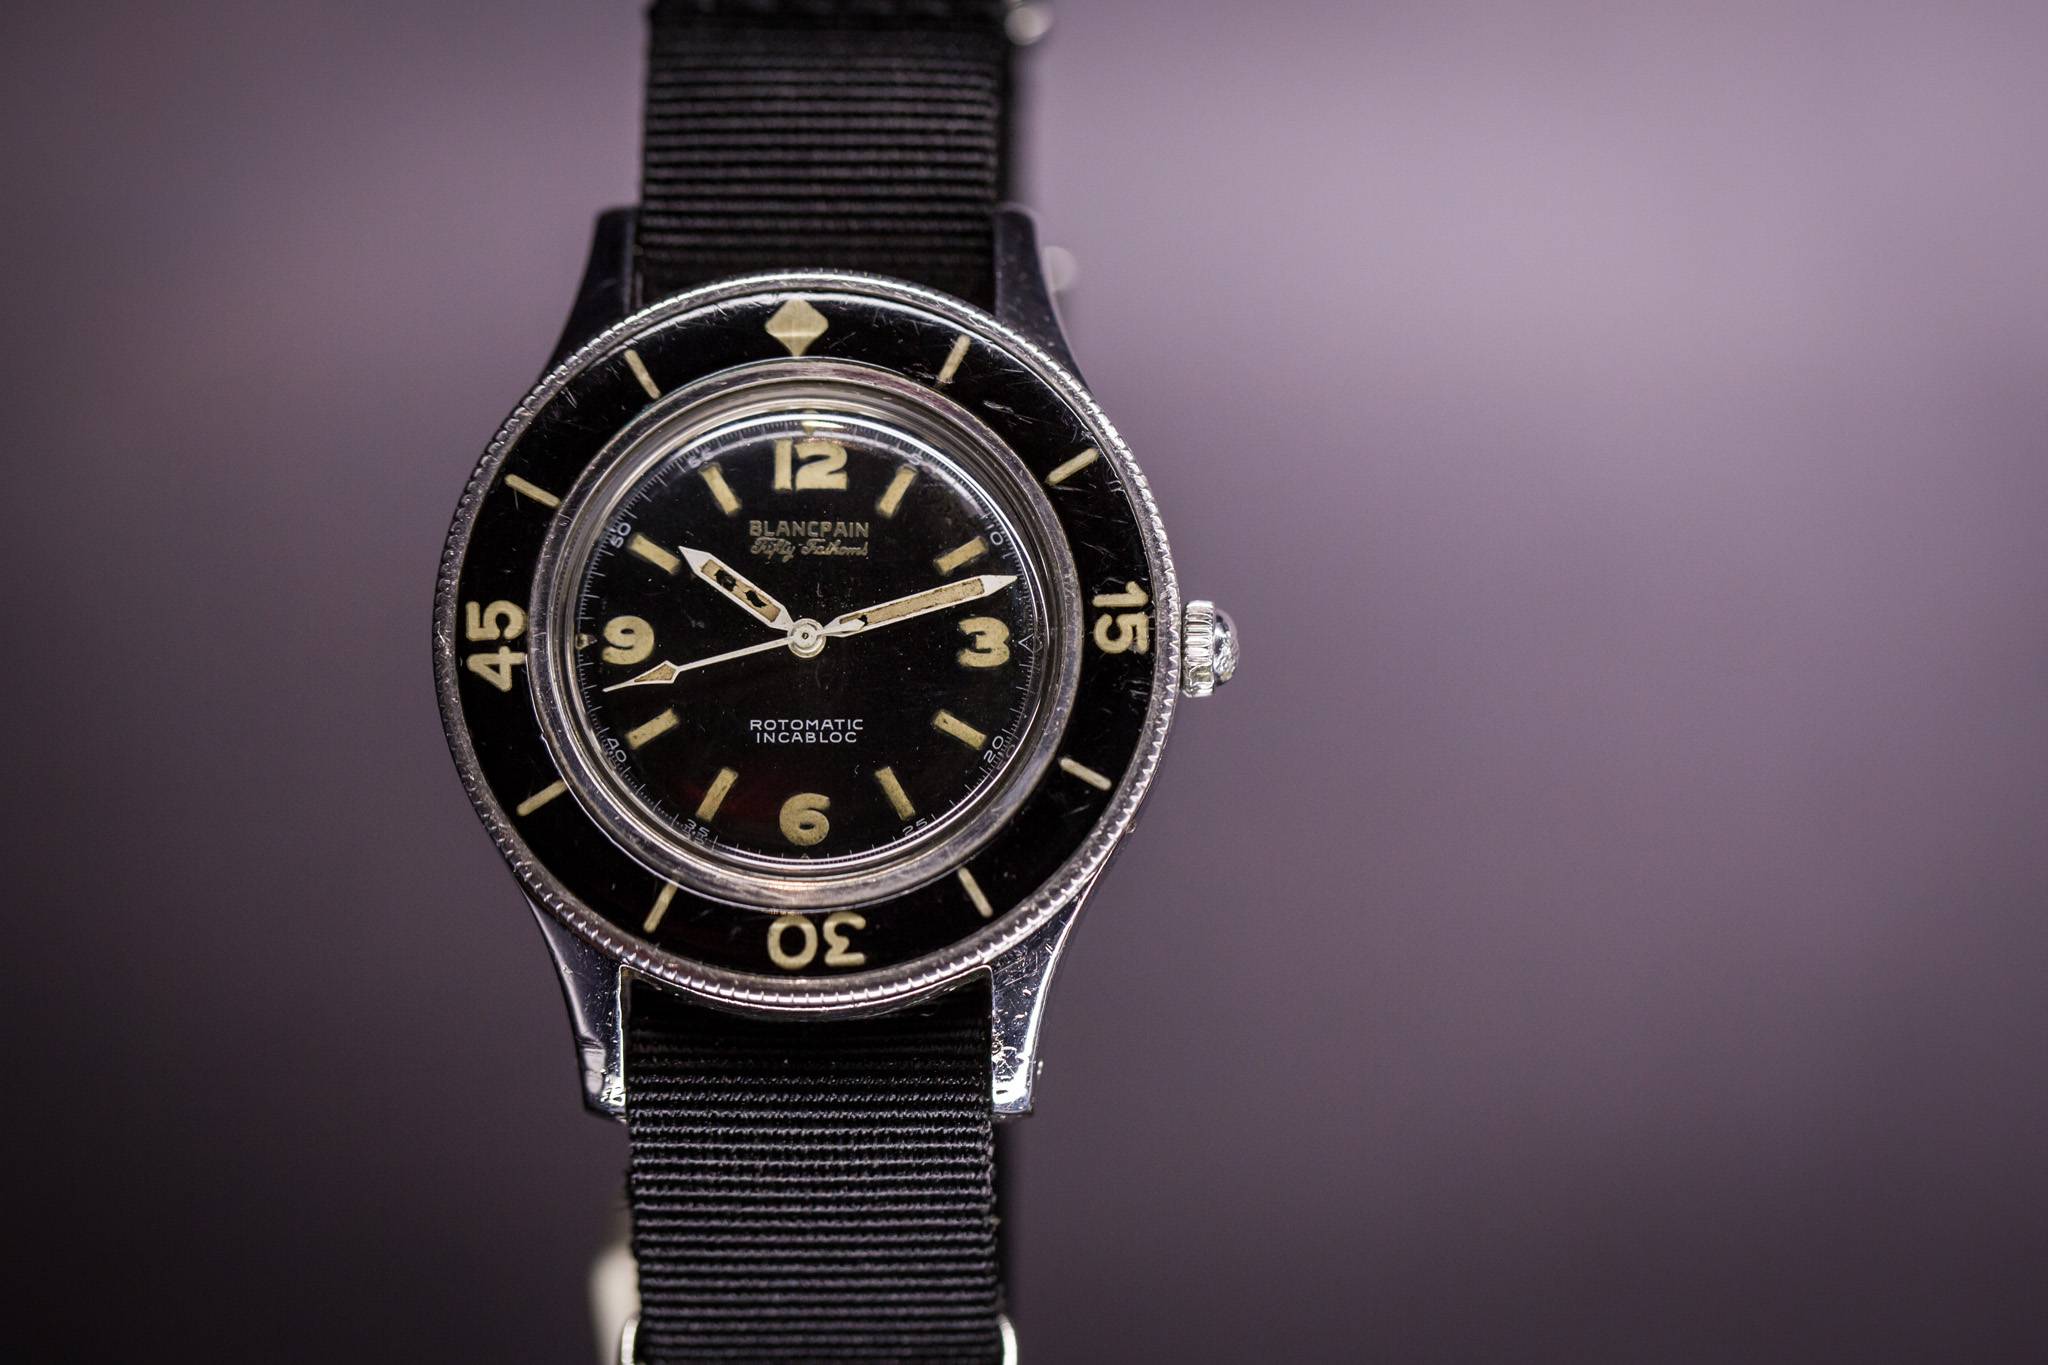 Original Blancpain Fifty Fathoms 1953 First Diving Watch Ever Made